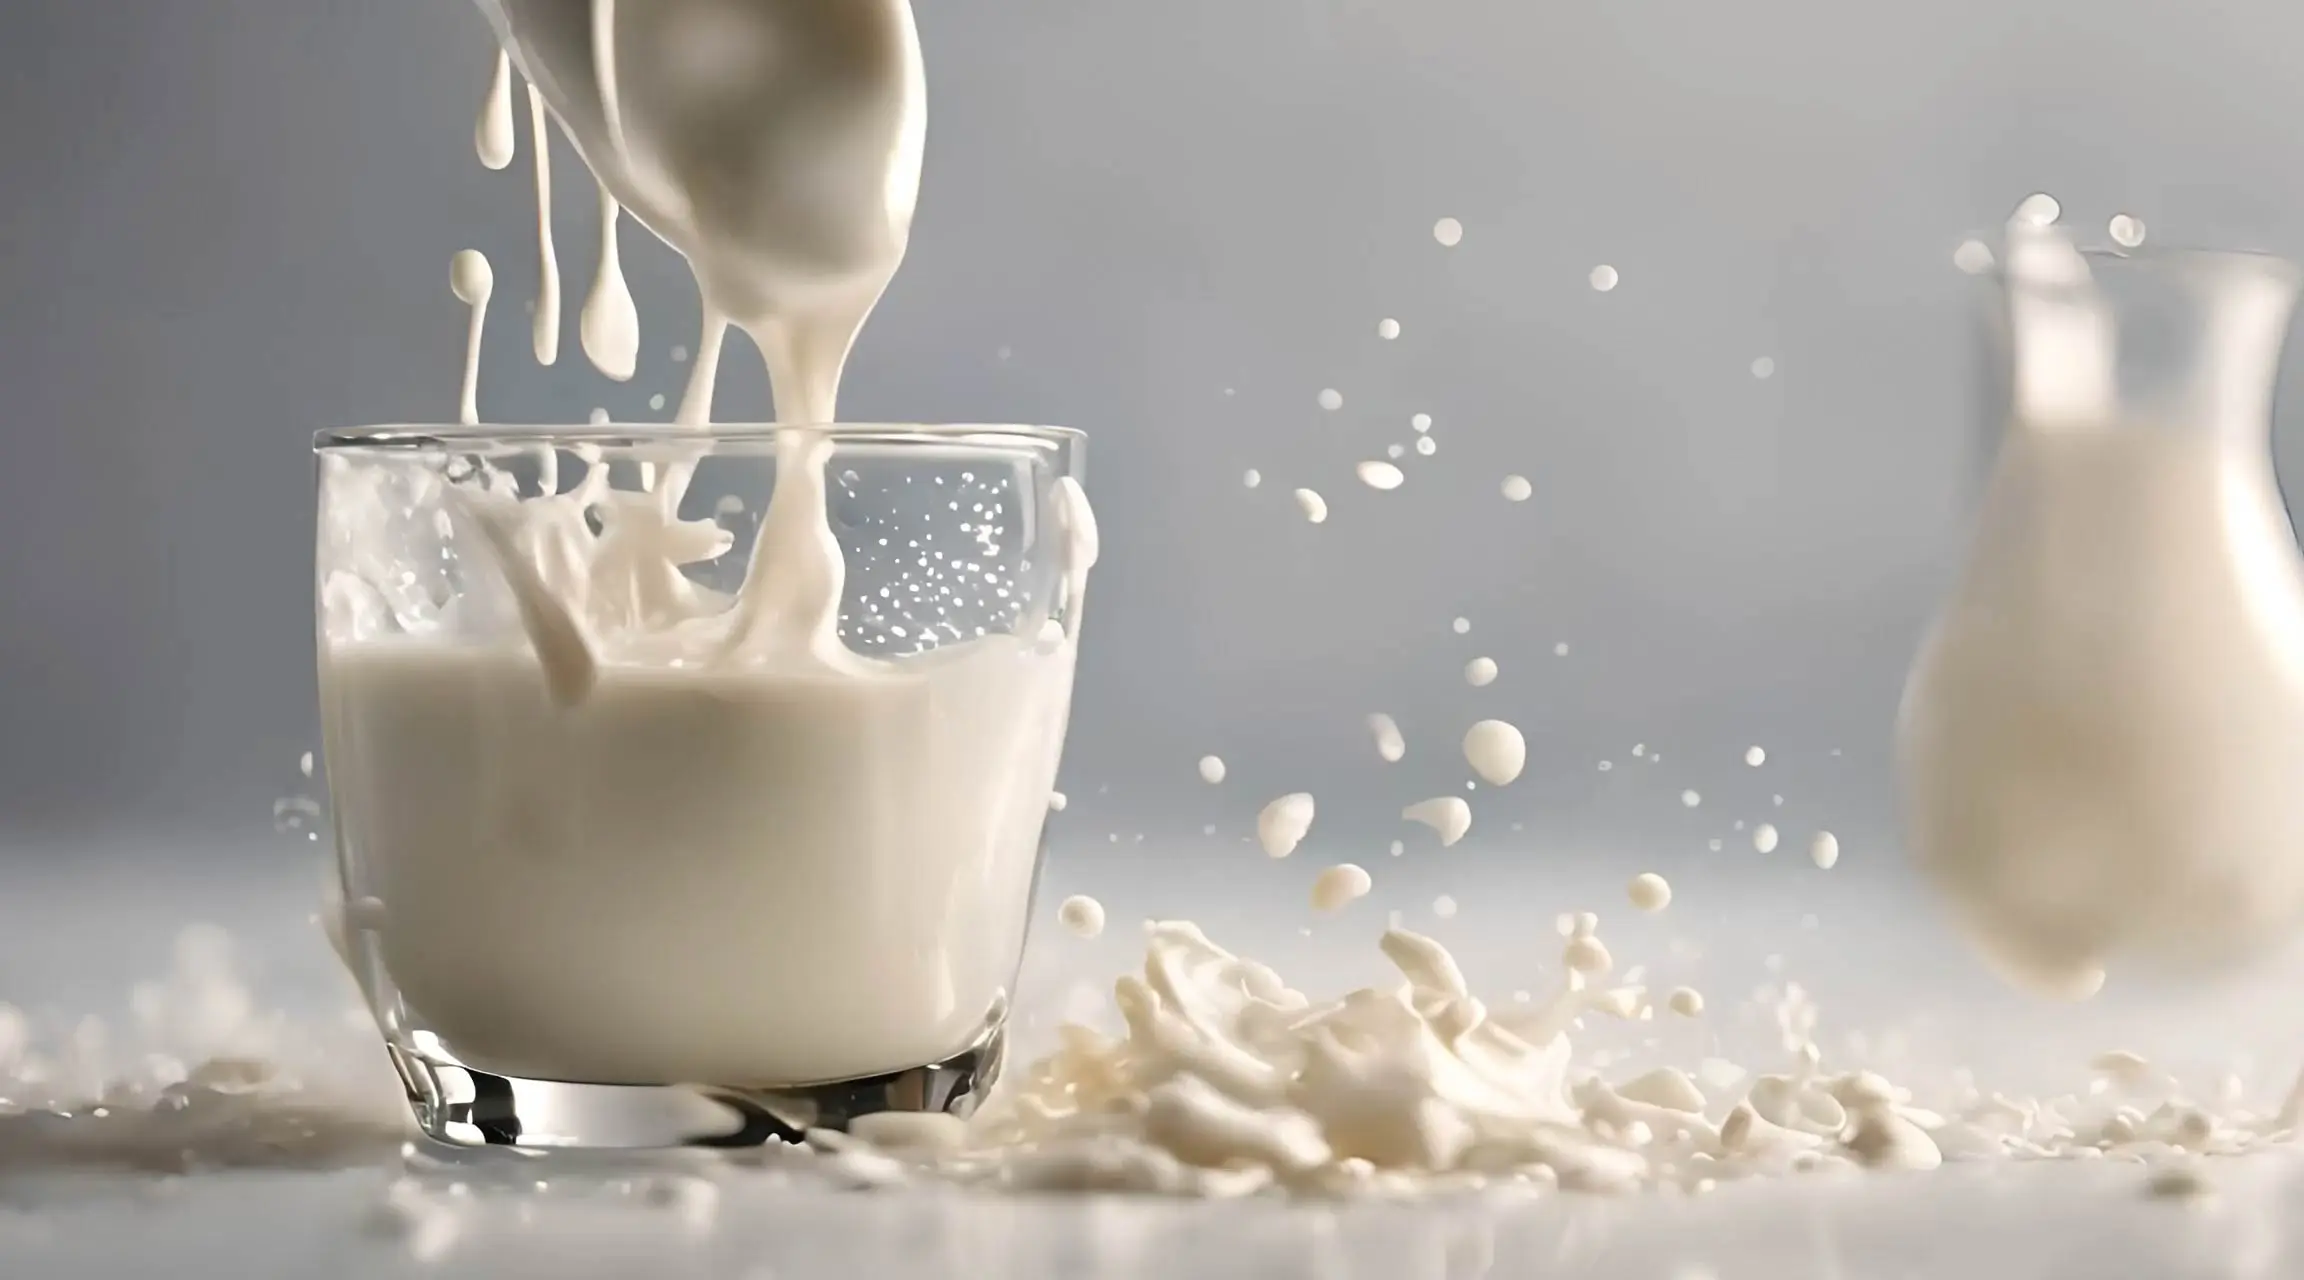 Pouring Milk into Glass Slow Motion Video